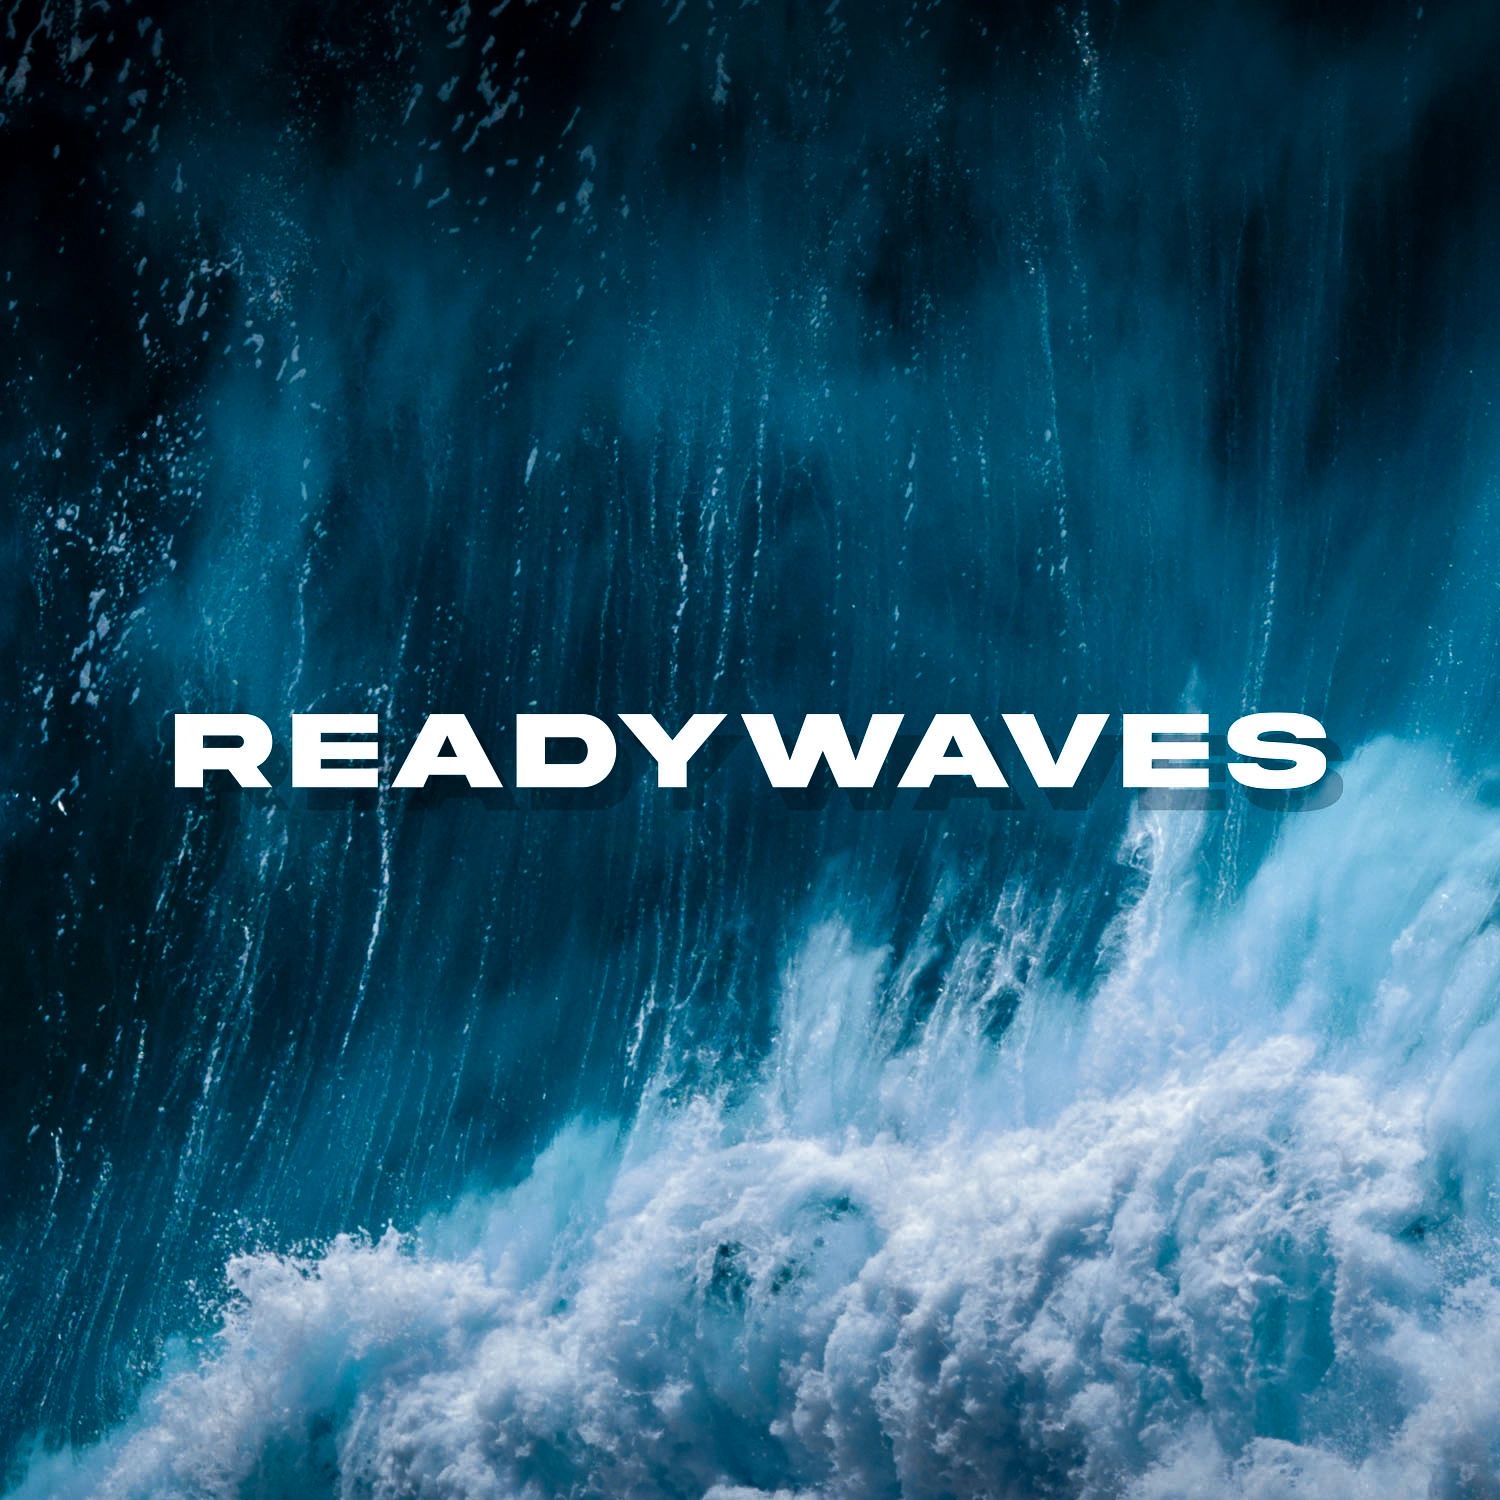 READYWAVES - Copyright Free Music, Streamers, Youtubers and Podcasts